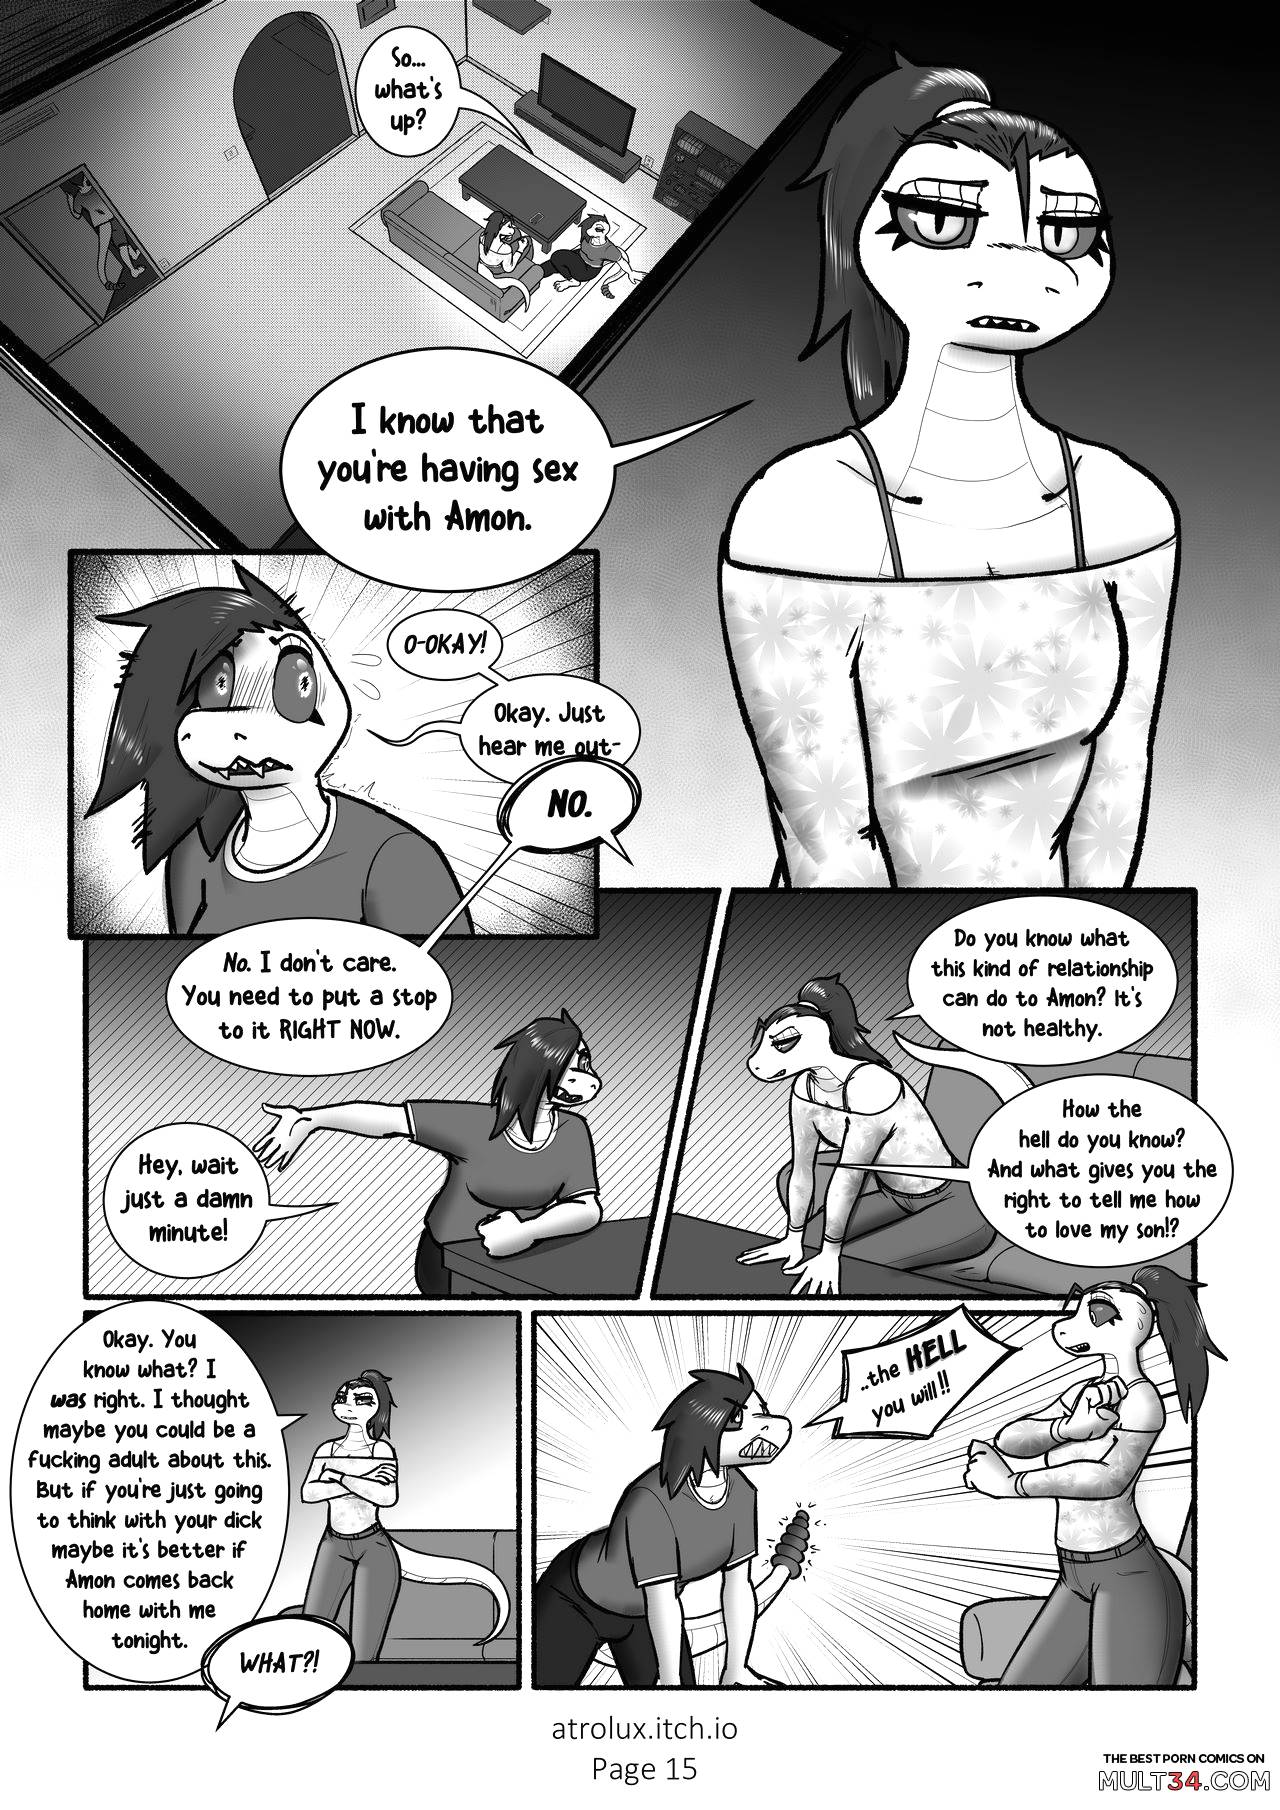 Shedding Inhibitions 6 - Feigned Innocence page 18